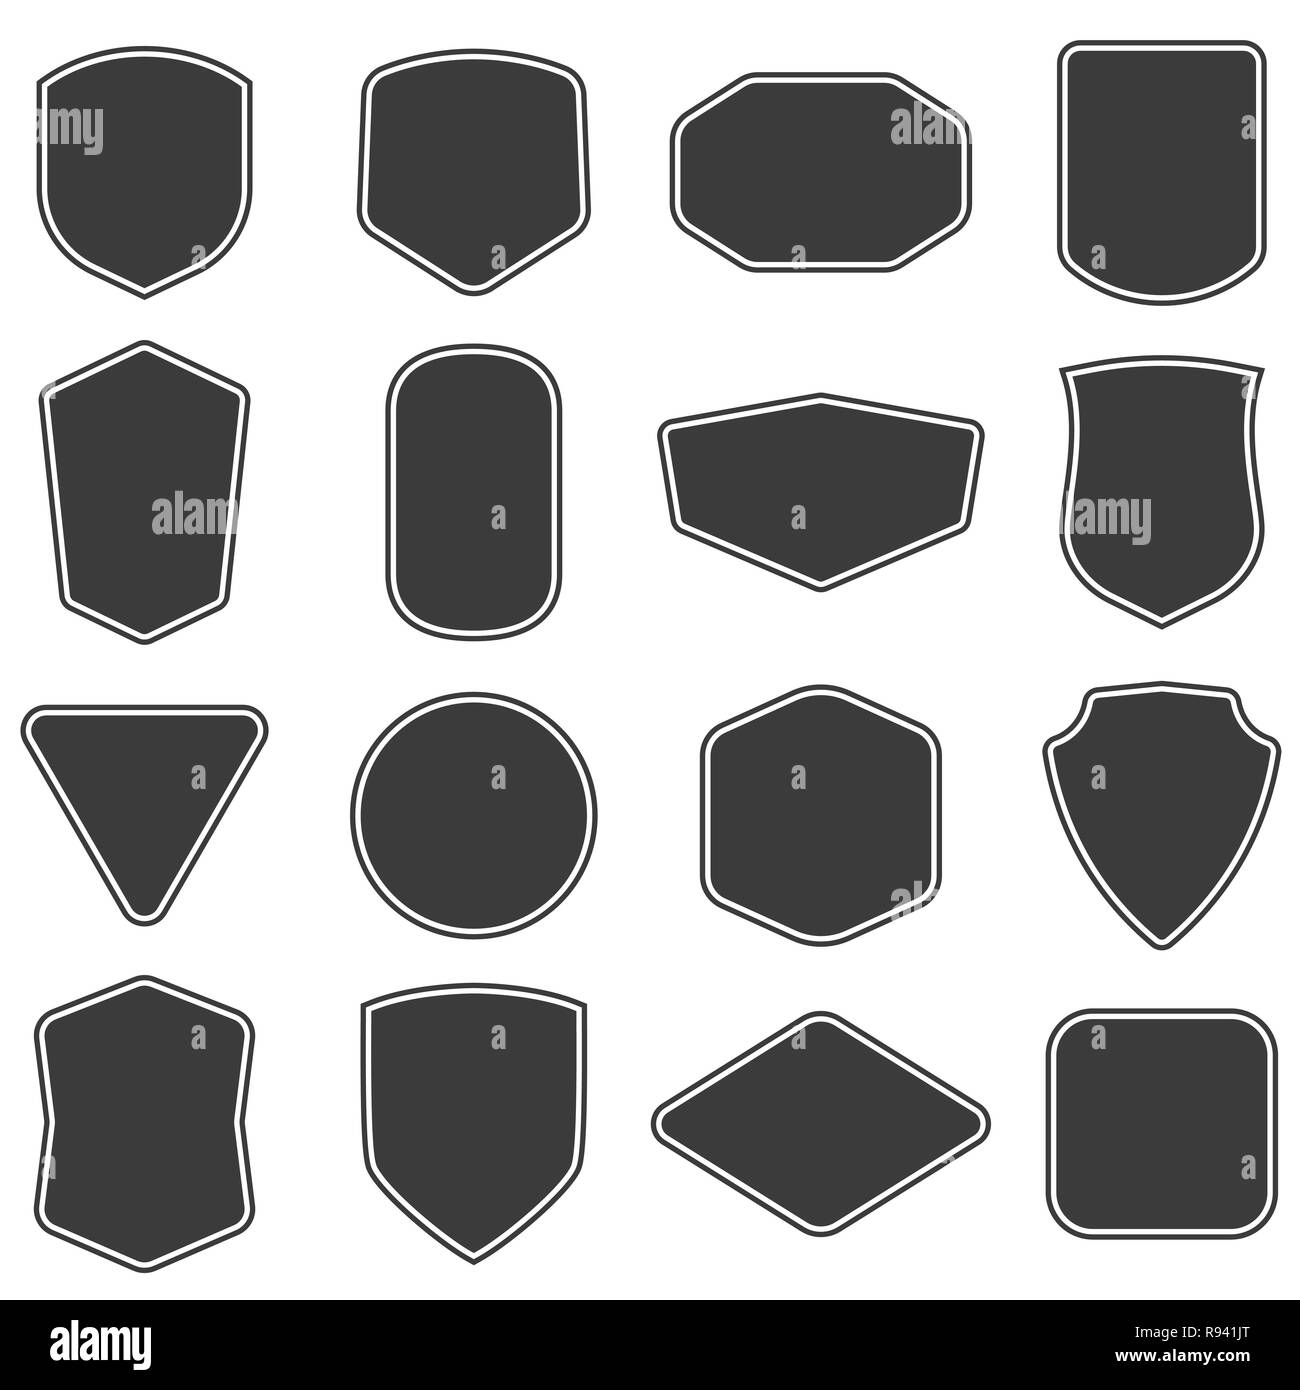 Set of vitage label and badges shape collections. Vector illustration. Black template for patch, insignias, overlay. Stock Vector